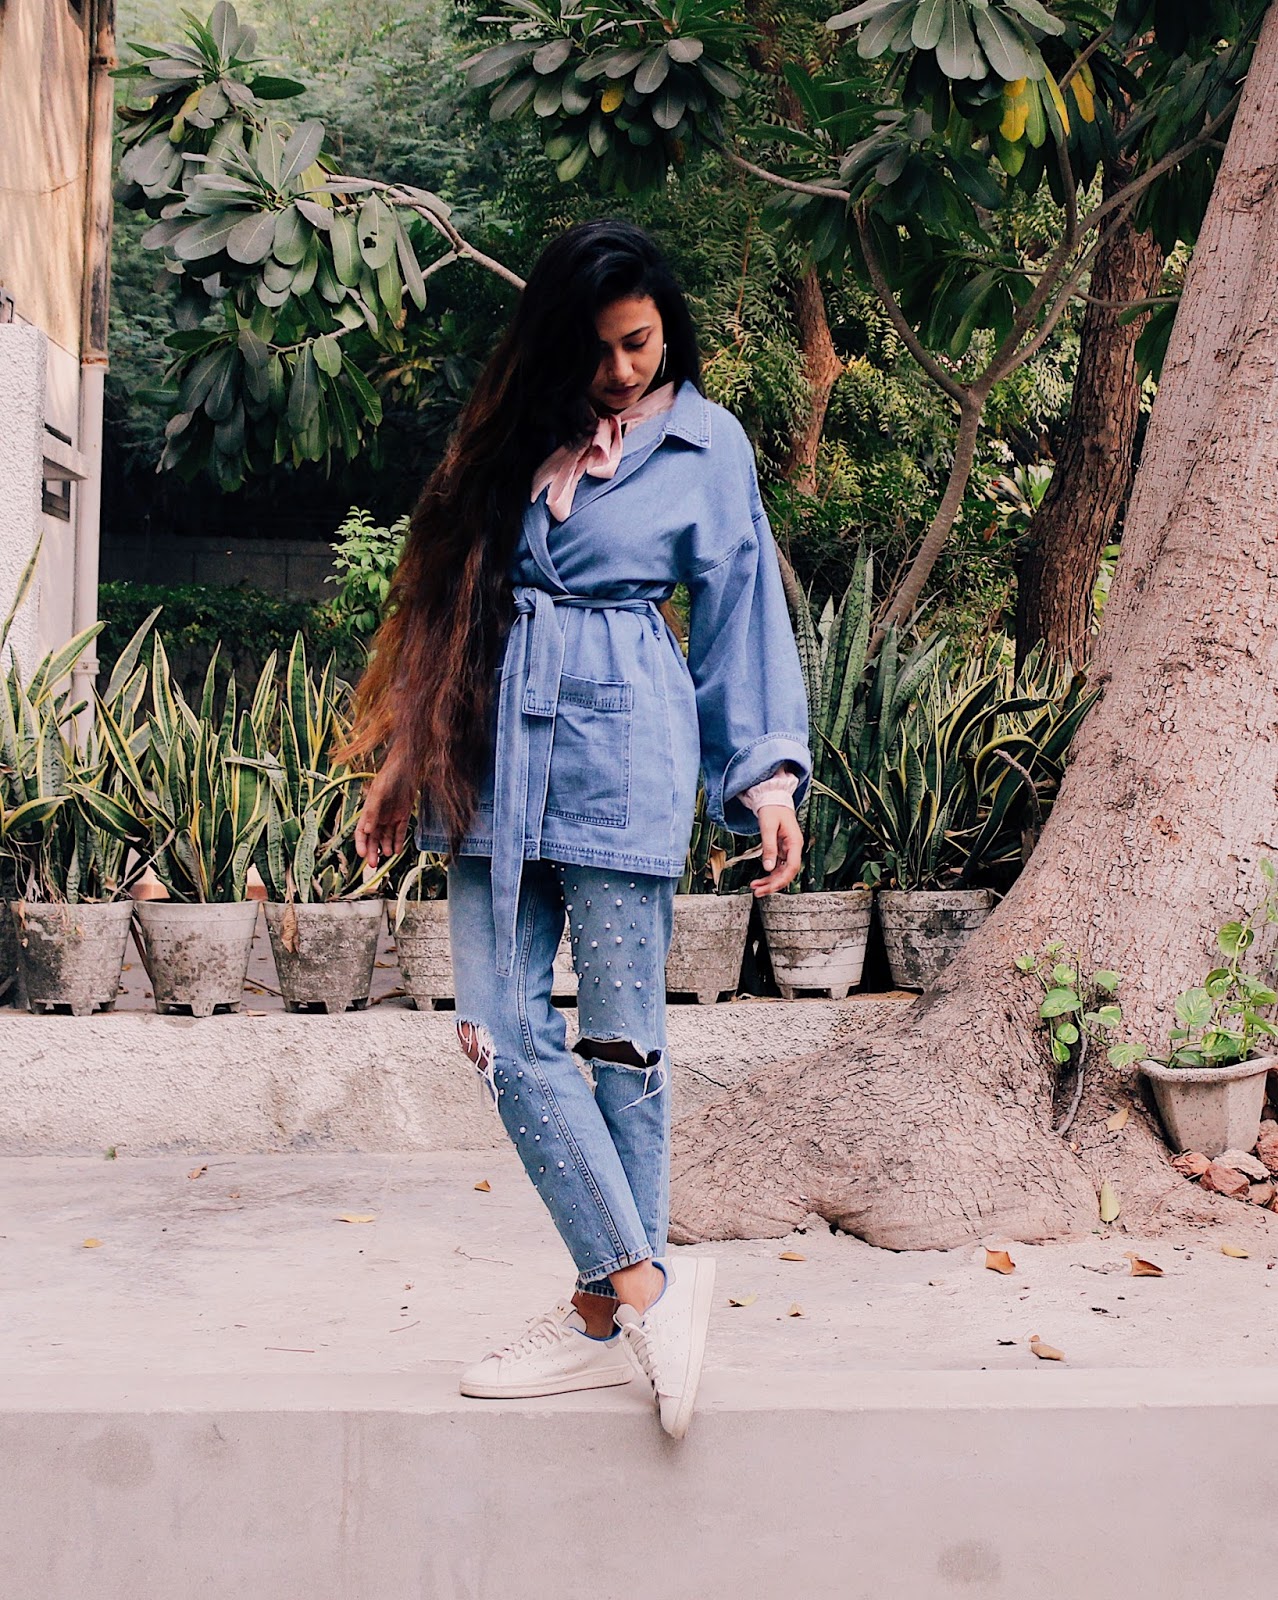 the most doable trends for every girl, denim on denim, monochrome, indian fashion blogger, uk blog, delhi blogger, london blog, effortless style, parisian chic, style kimono, pearl denim, pussy bow blouse, weekend outfit, lookbook, autumn fashion, european street style, london street style 2017